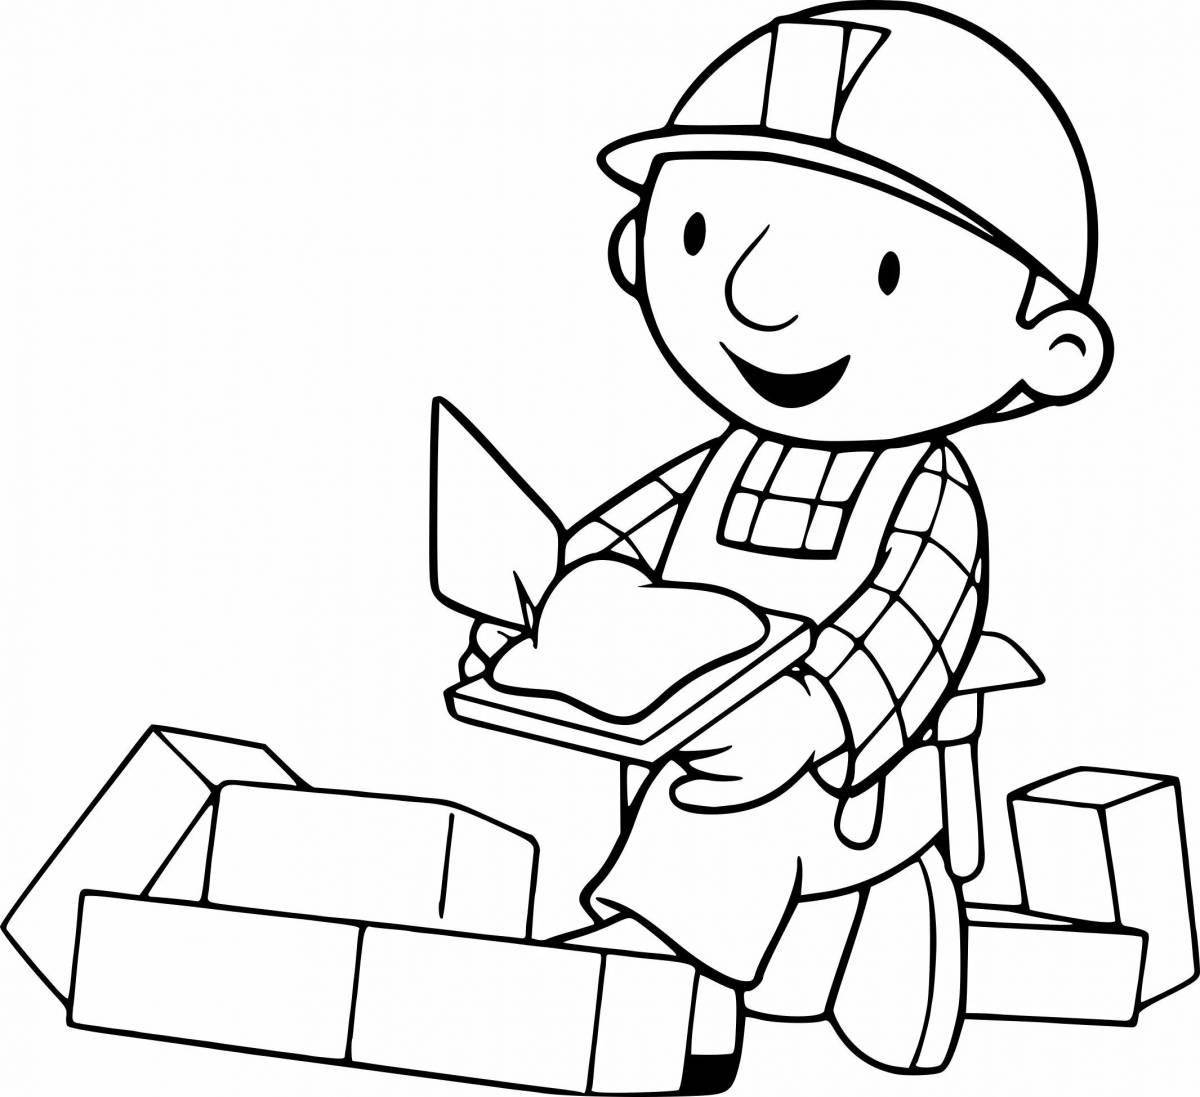 Building a house coloring page